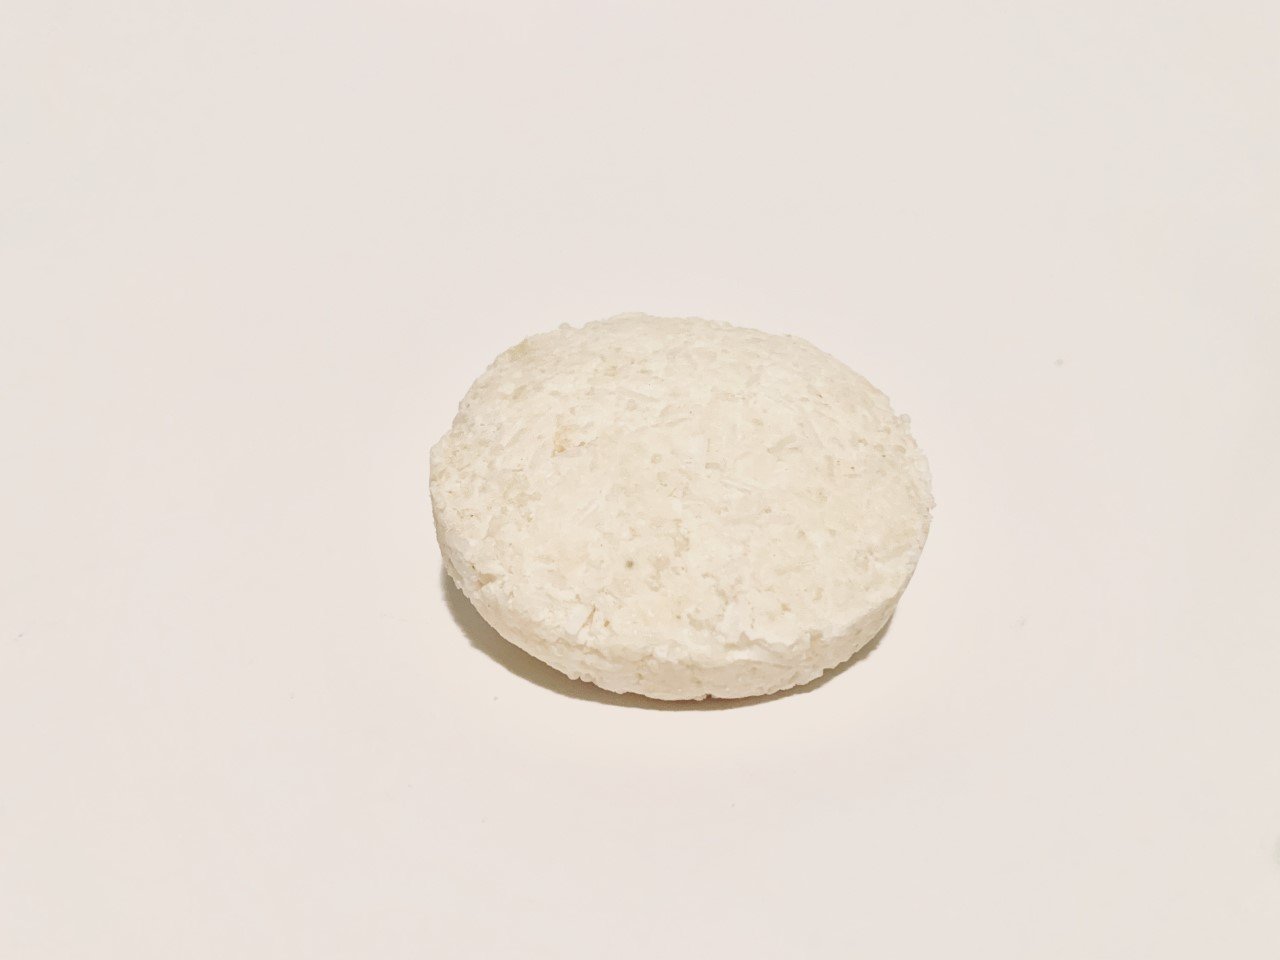 be YOU Shampoo Bar 60-65g be YOU - nelsonnaturals remineralizing toothpaste